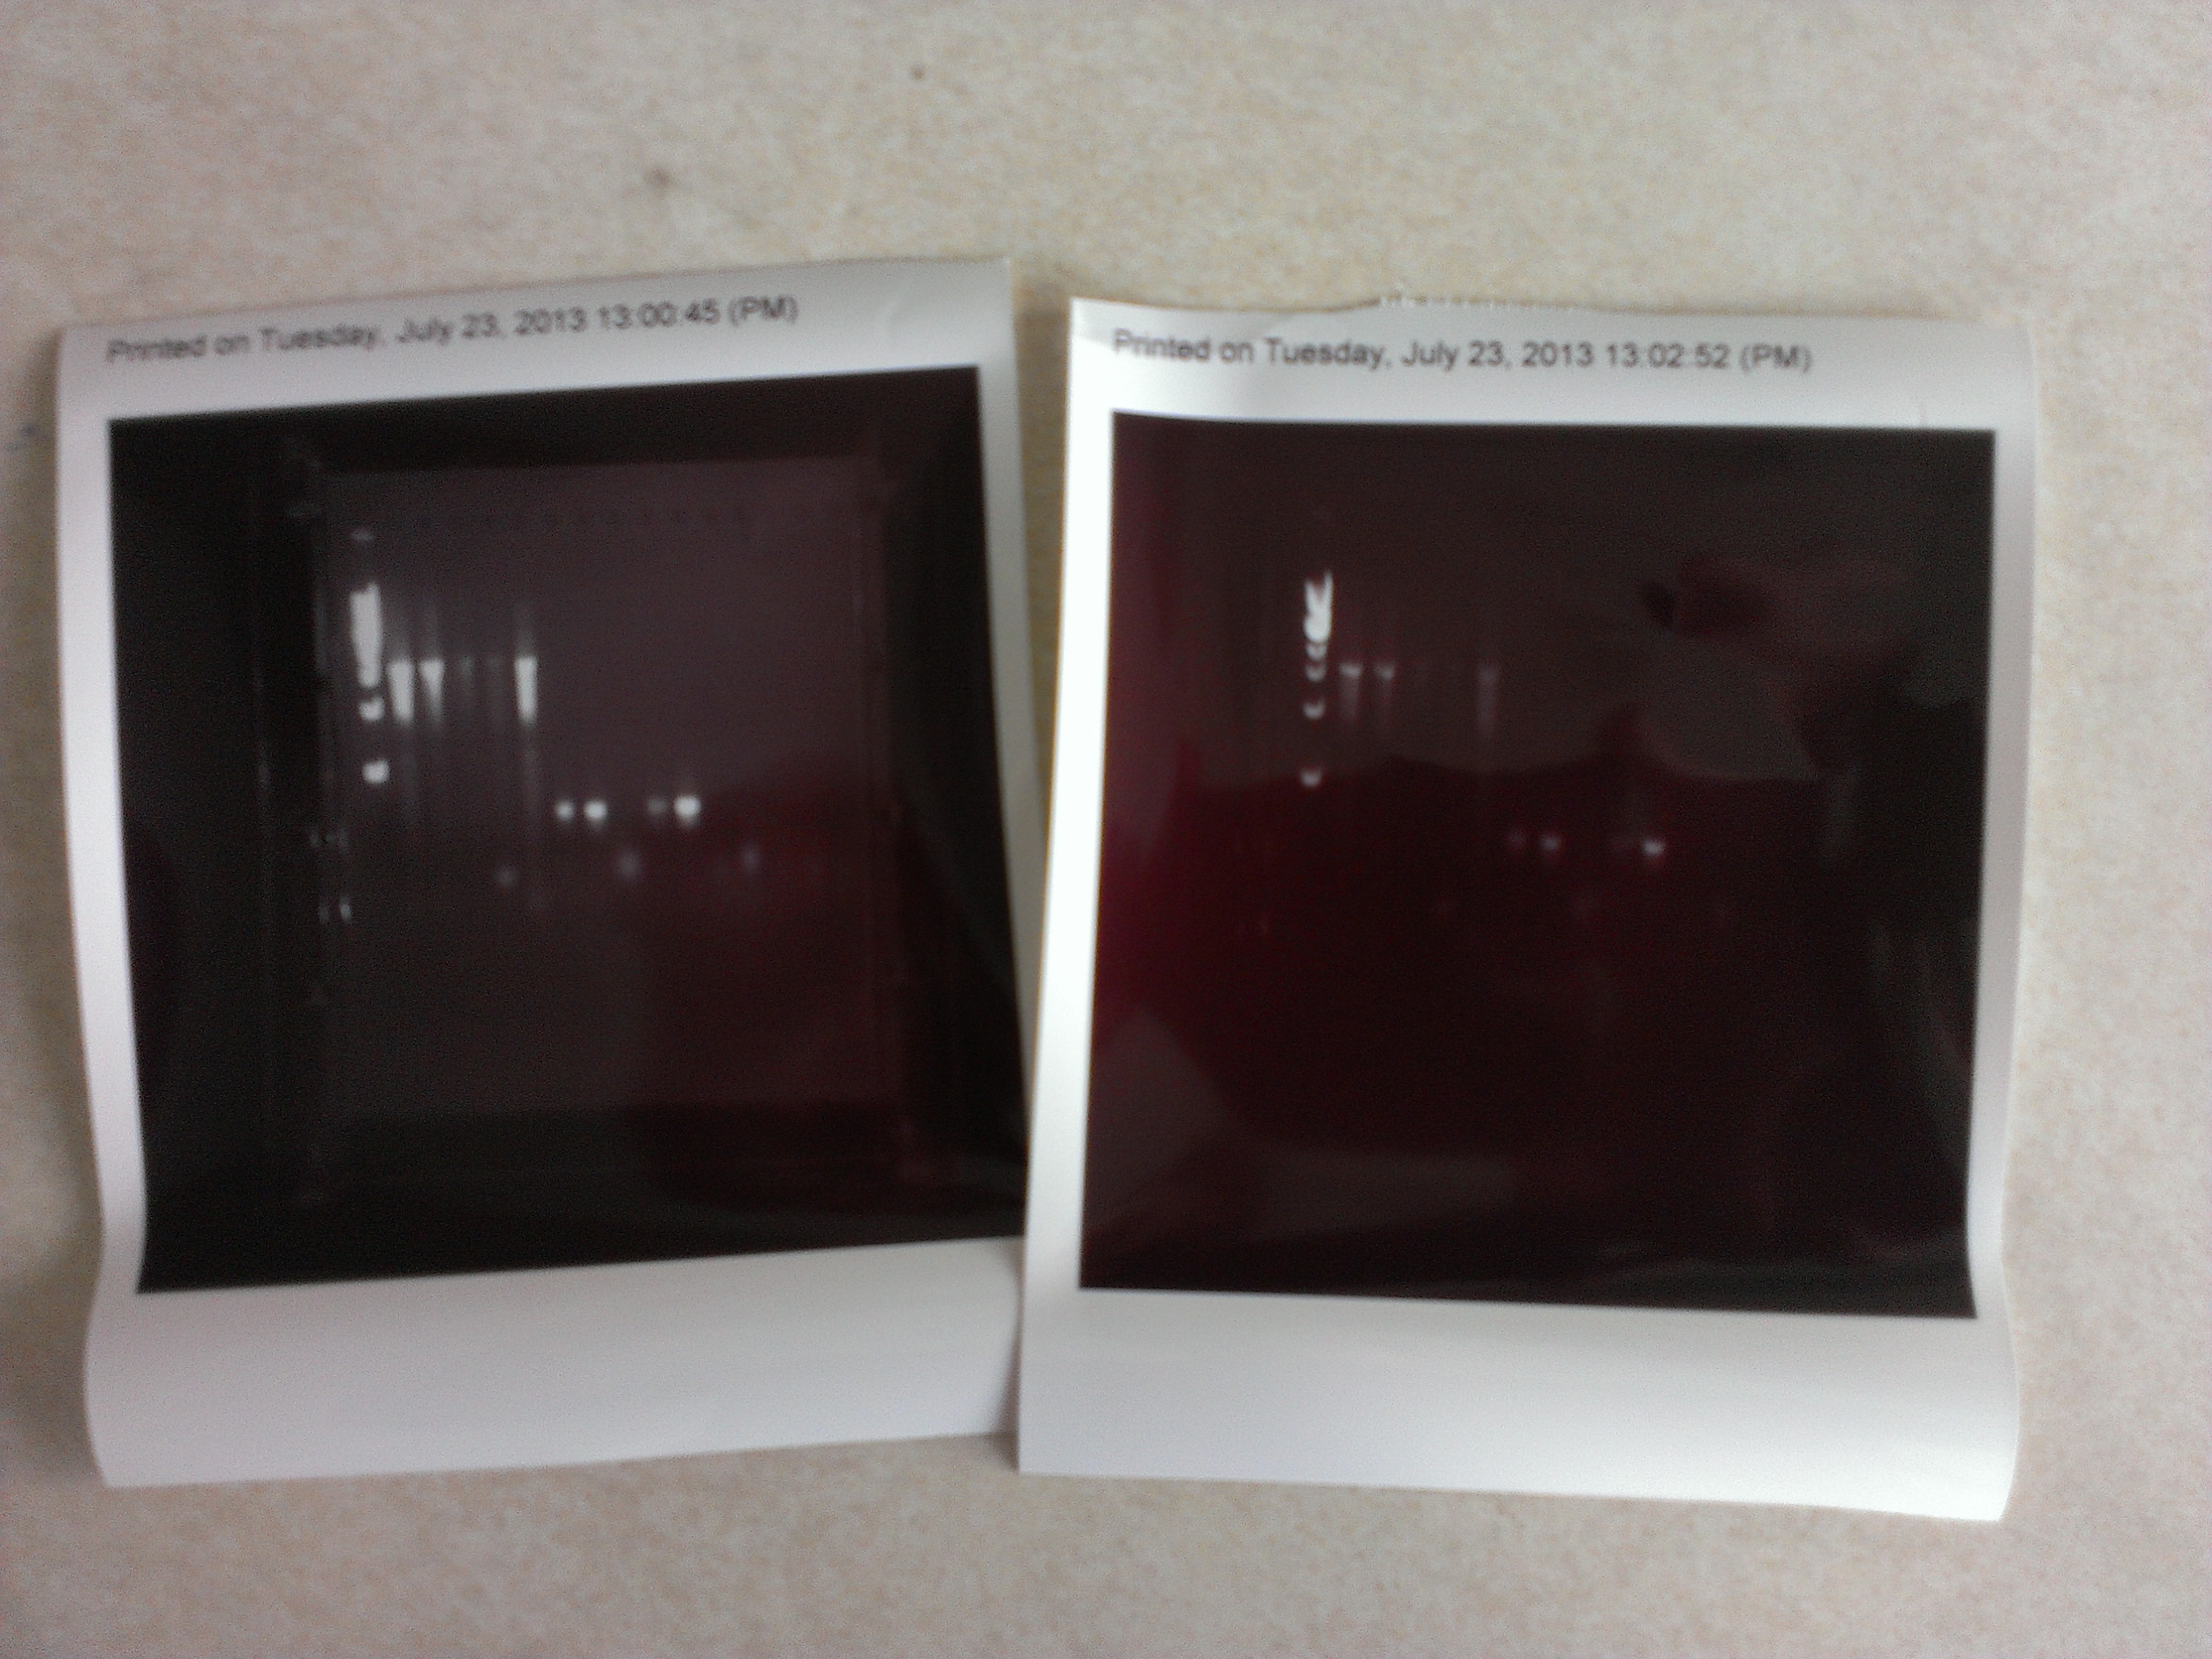 Running some gels, getting some results